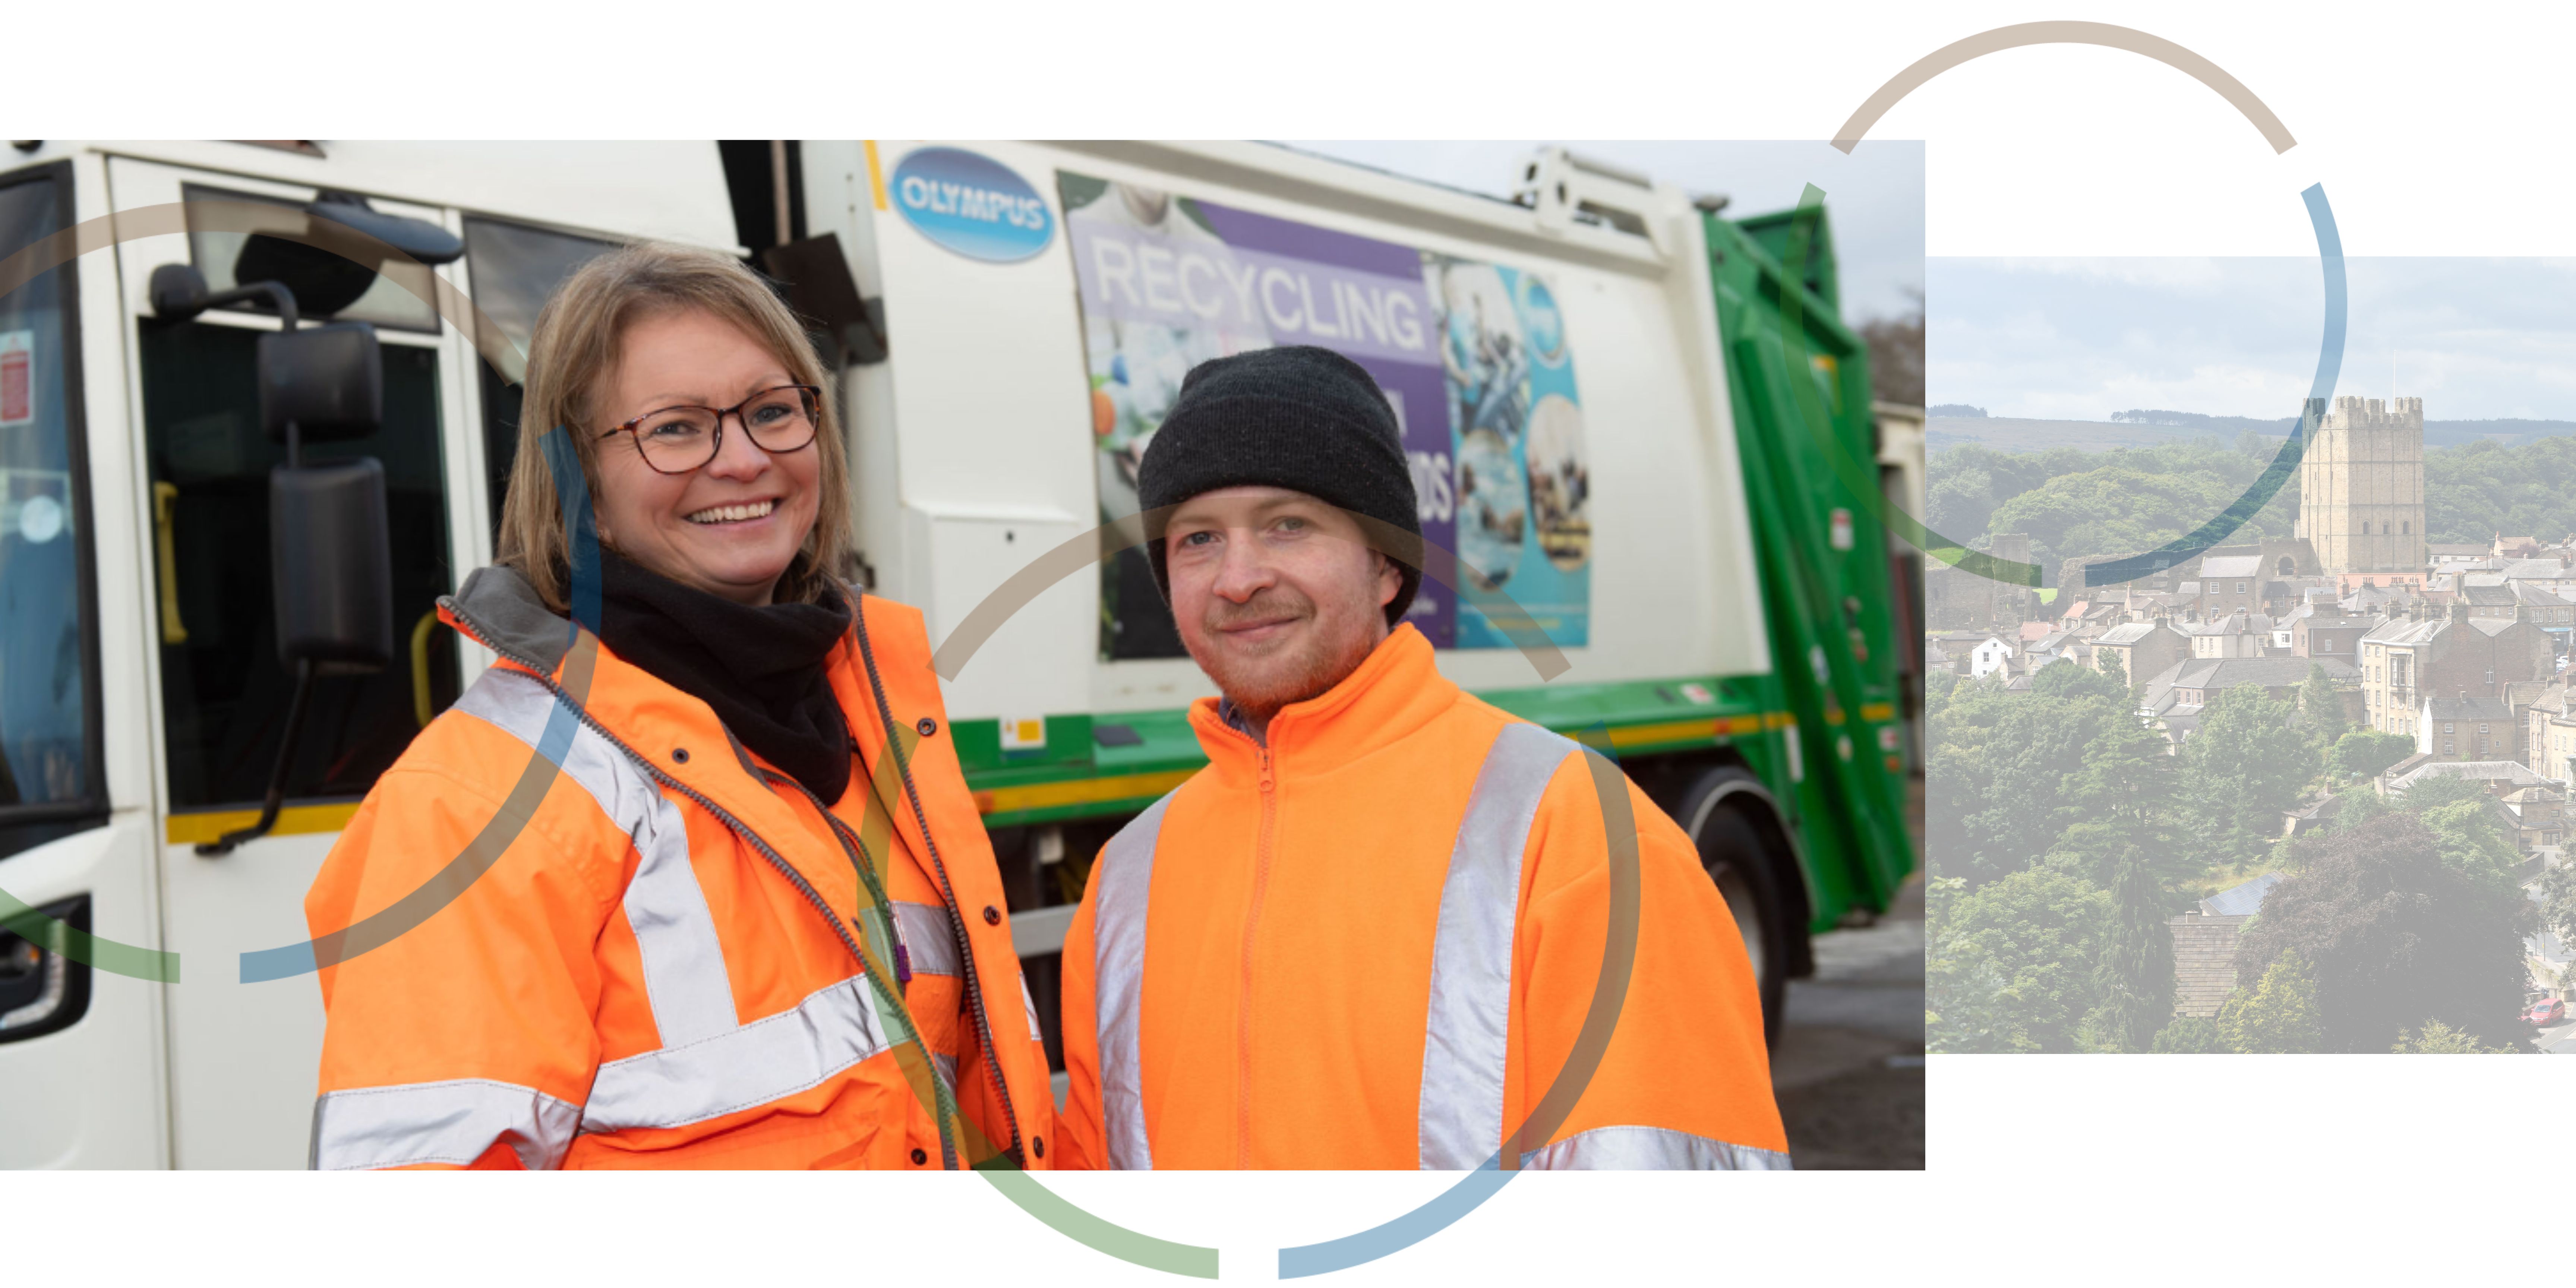 A photograph of two people in high visibility jackets smiling in front of a recycling collection vehicle next to a photograph of a town in North Yorkshire.